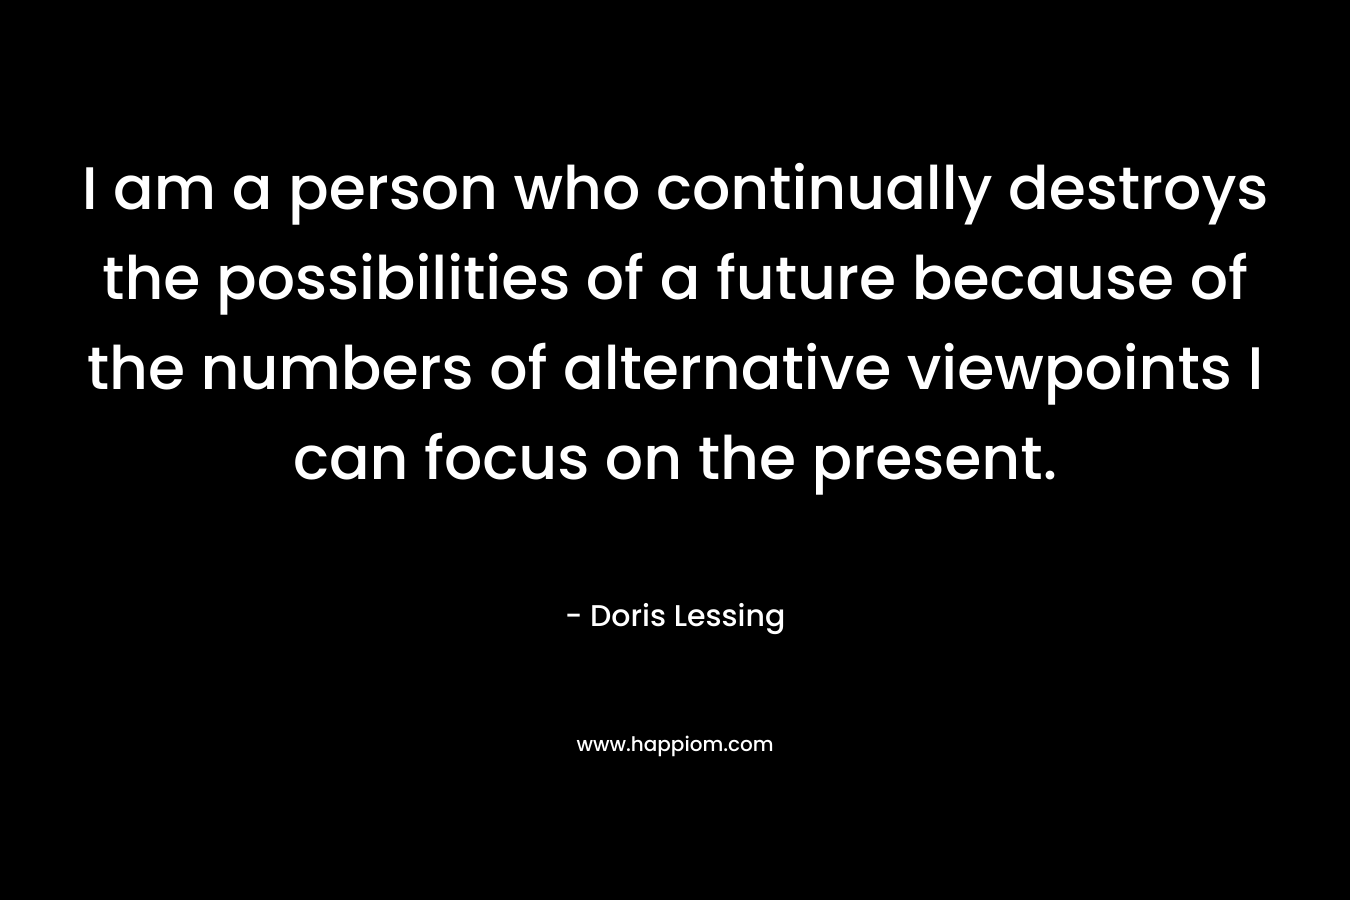 I am a person who continually destroys the possibilities of a future because of the numbers of alternative viewpoints I can focus on the present. – Doris Lessing